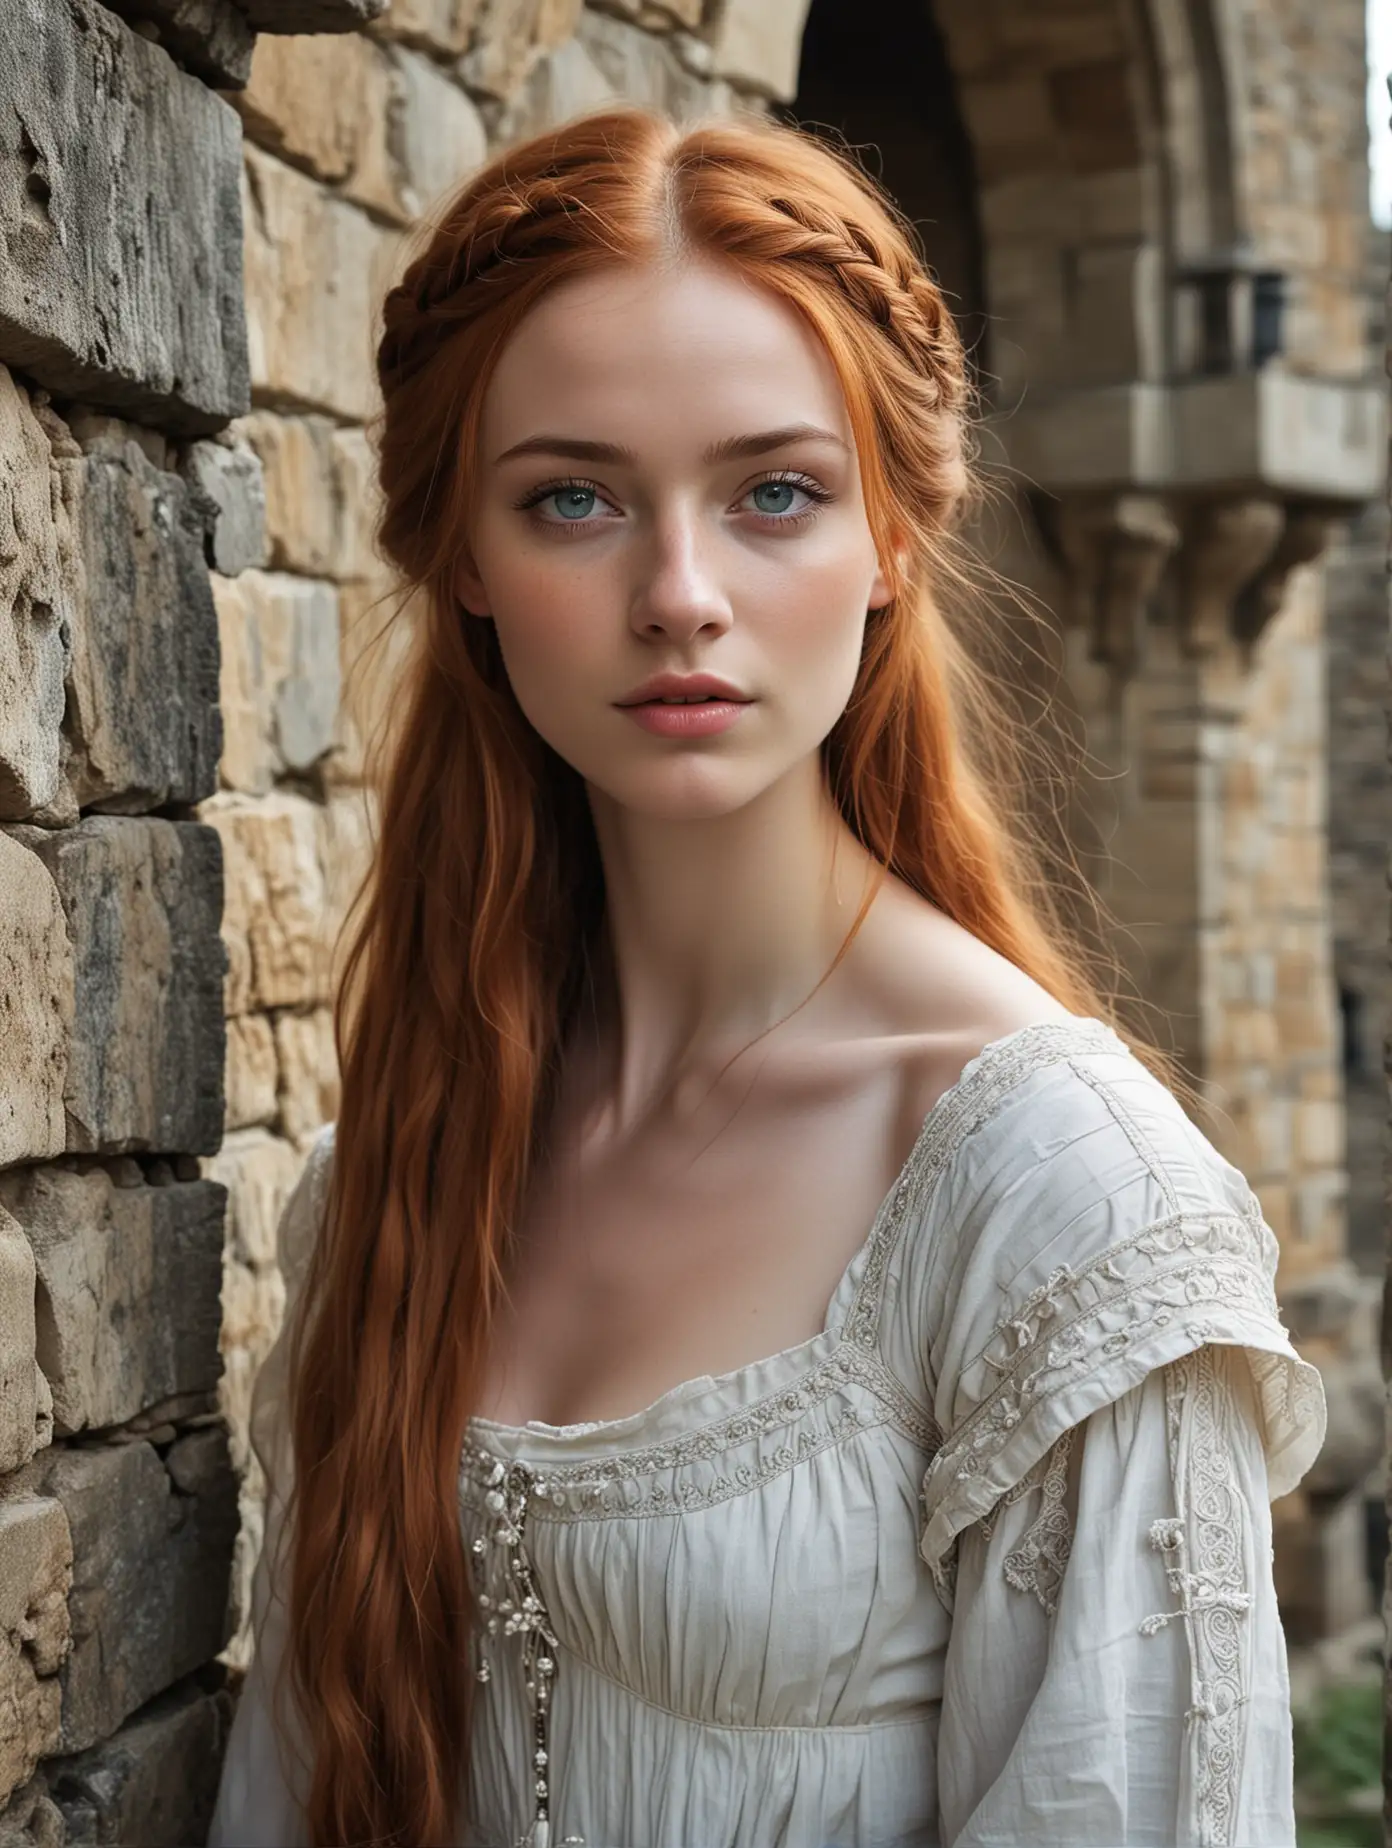 RedHaired Teen in Medieval Castle Fantasy Scene